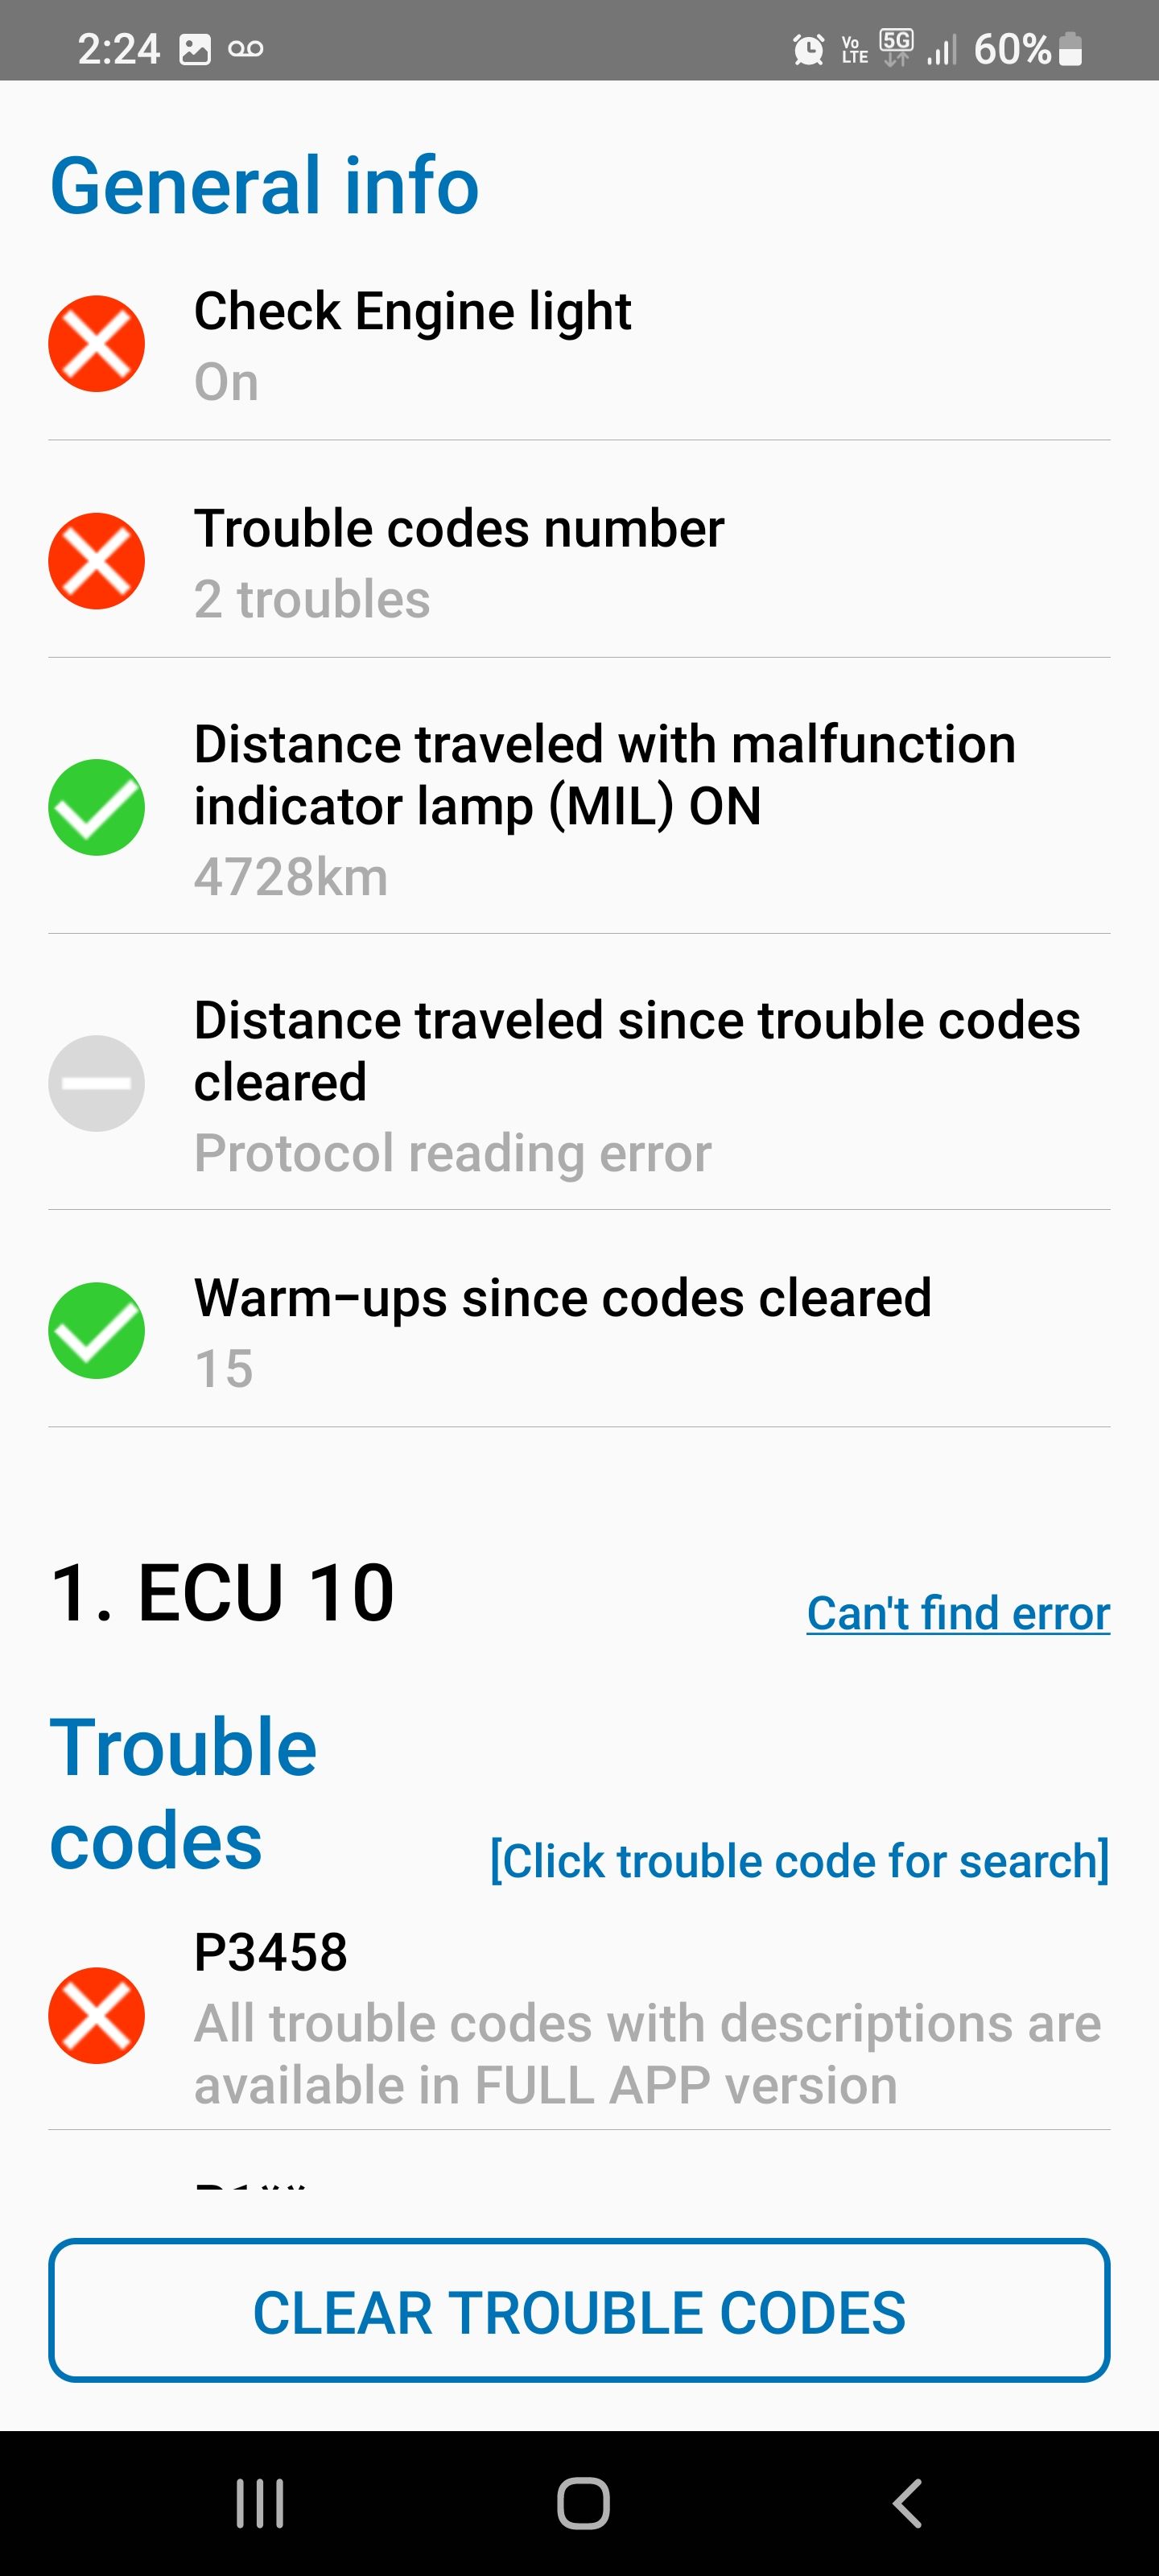 obd arny app screenshot showing menu designed to clear trouble codes